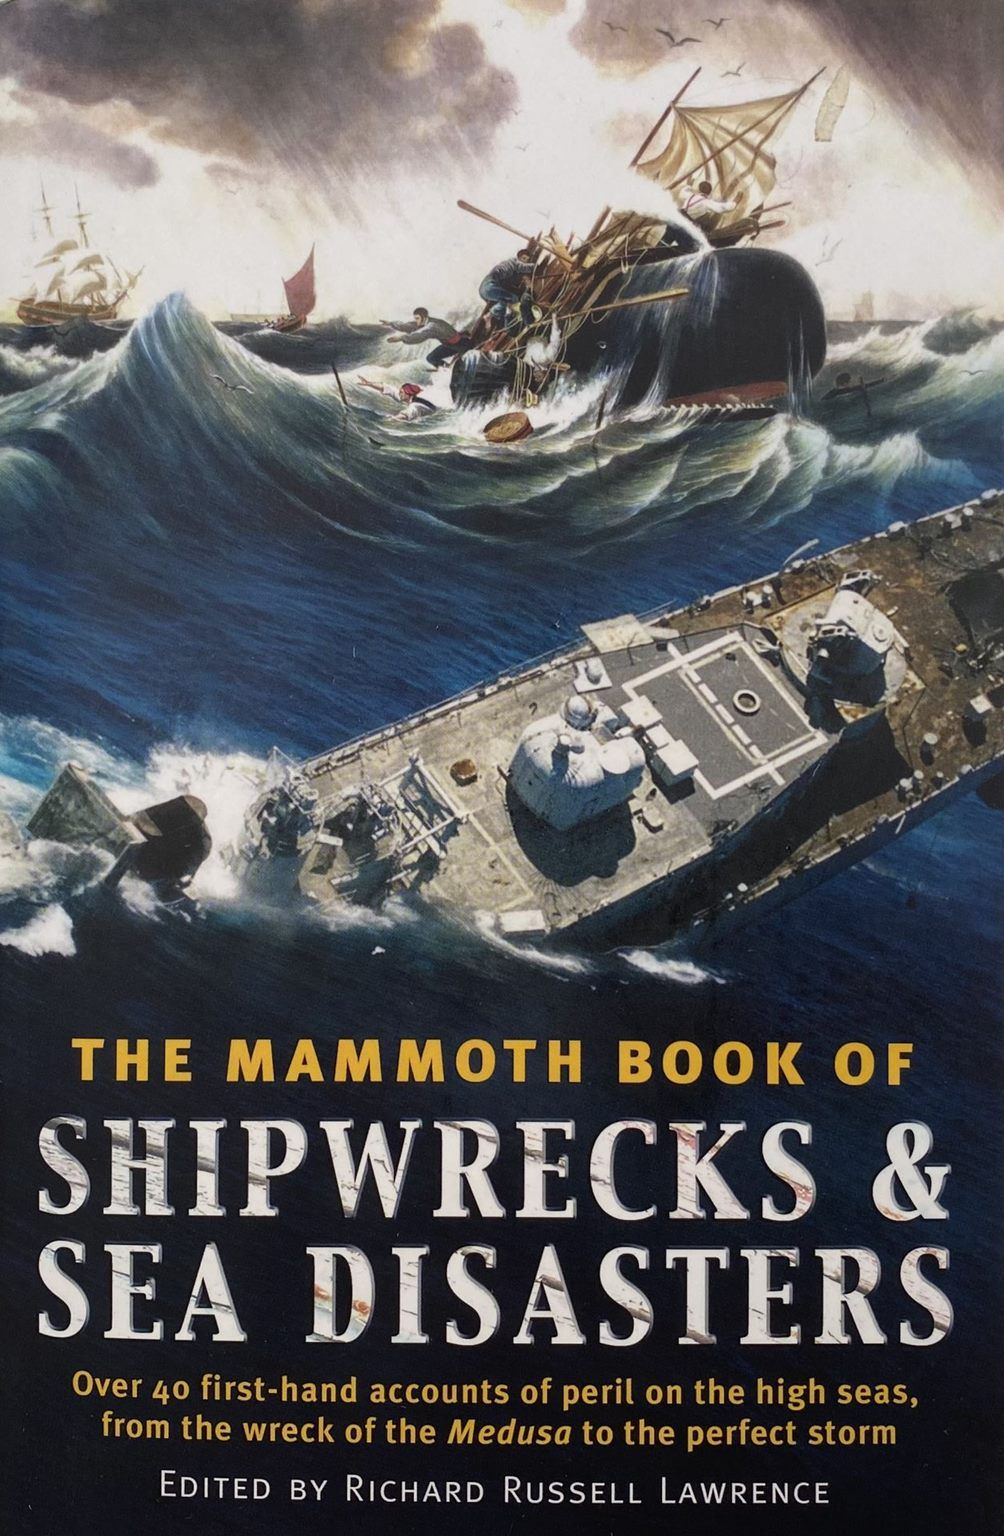 THE MAMMOTH BOOK OF Storms, Shipwrecks and Sea Disasters